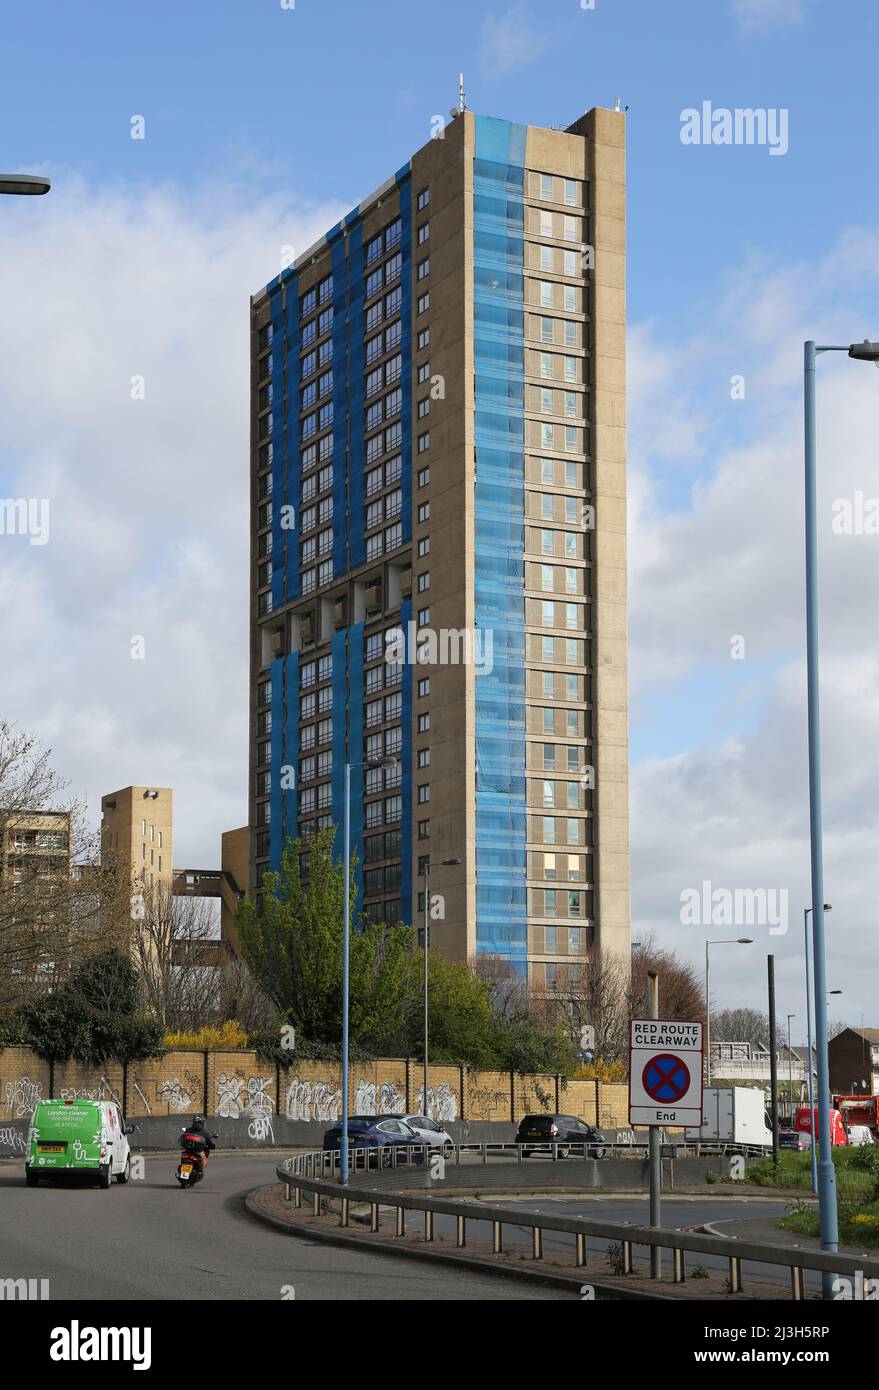 Balfron Tower, London. Famous brutalist tower block by architect Erno Goldfinger. Undergoing refurbishment to luxury flats. Shows temporary netting. Stock Photo